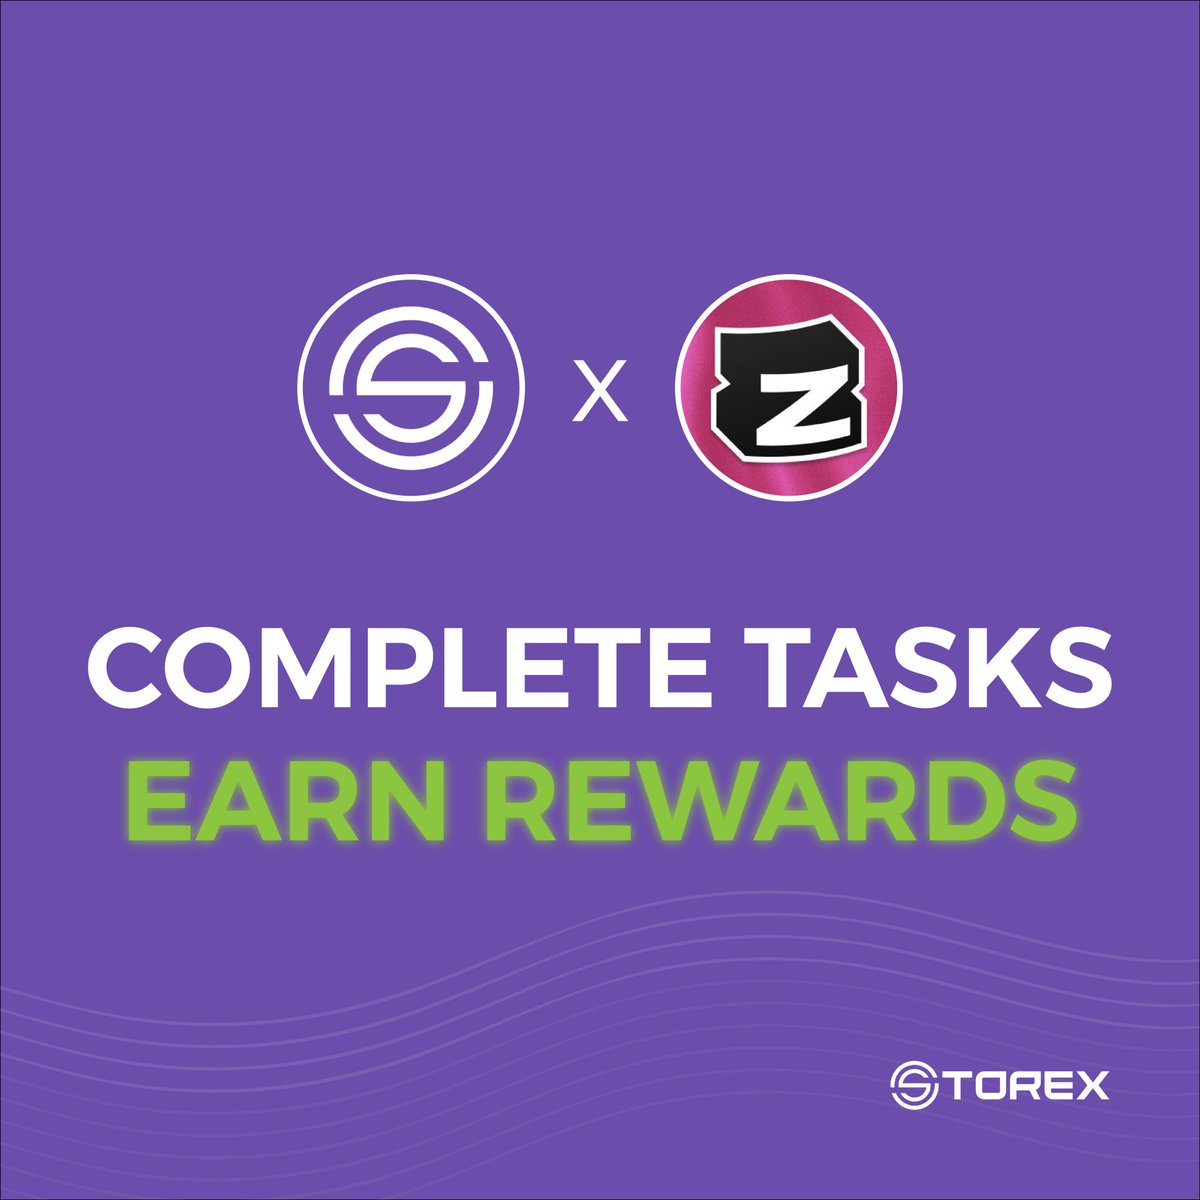 🏆#Storex / @zealy_io Campaign 🏆 🪂 #Airdrop is now LIVE - Claim $STRX for levelling up! 💰 Win your share of our 500,000 STRX Prize Pool for August! 👉Join Zealy here: zealy.io/c/storex 🎁 Complete quests & climb up the leaderboard to earn even more rewards!…